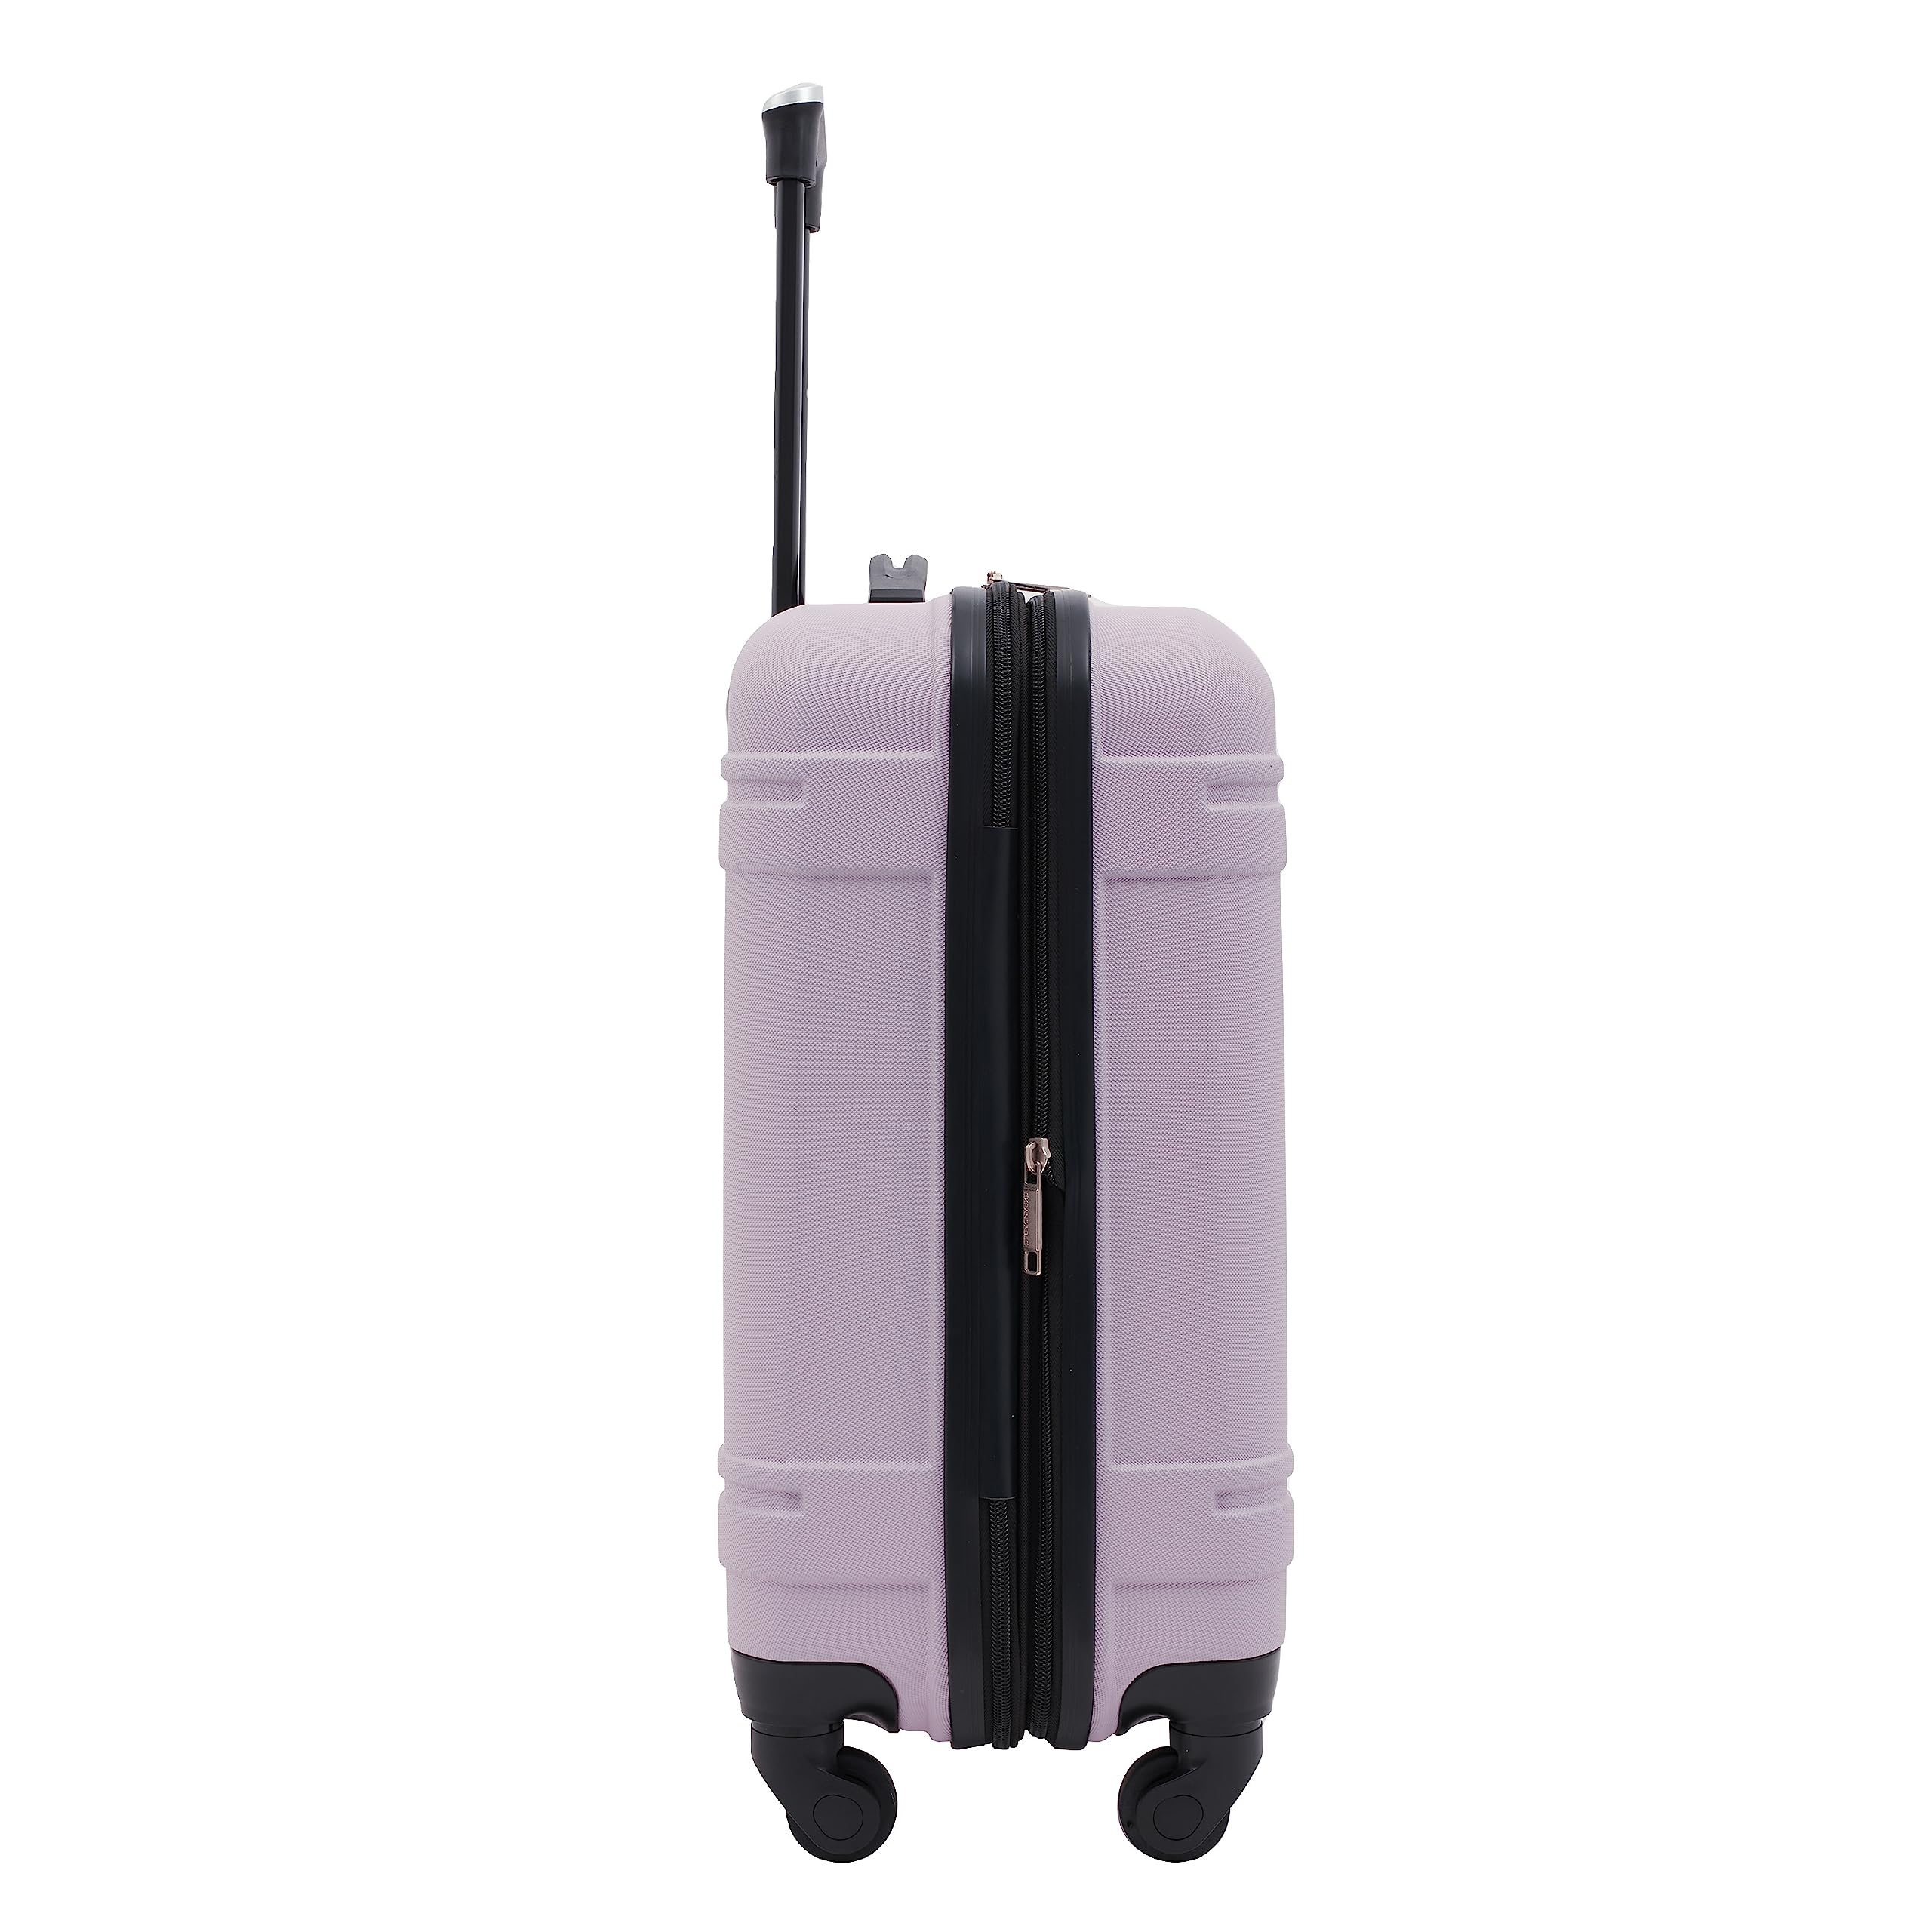 Wrangler Astral Hardside Luggage, Lilac, 20-Inch Carry-On